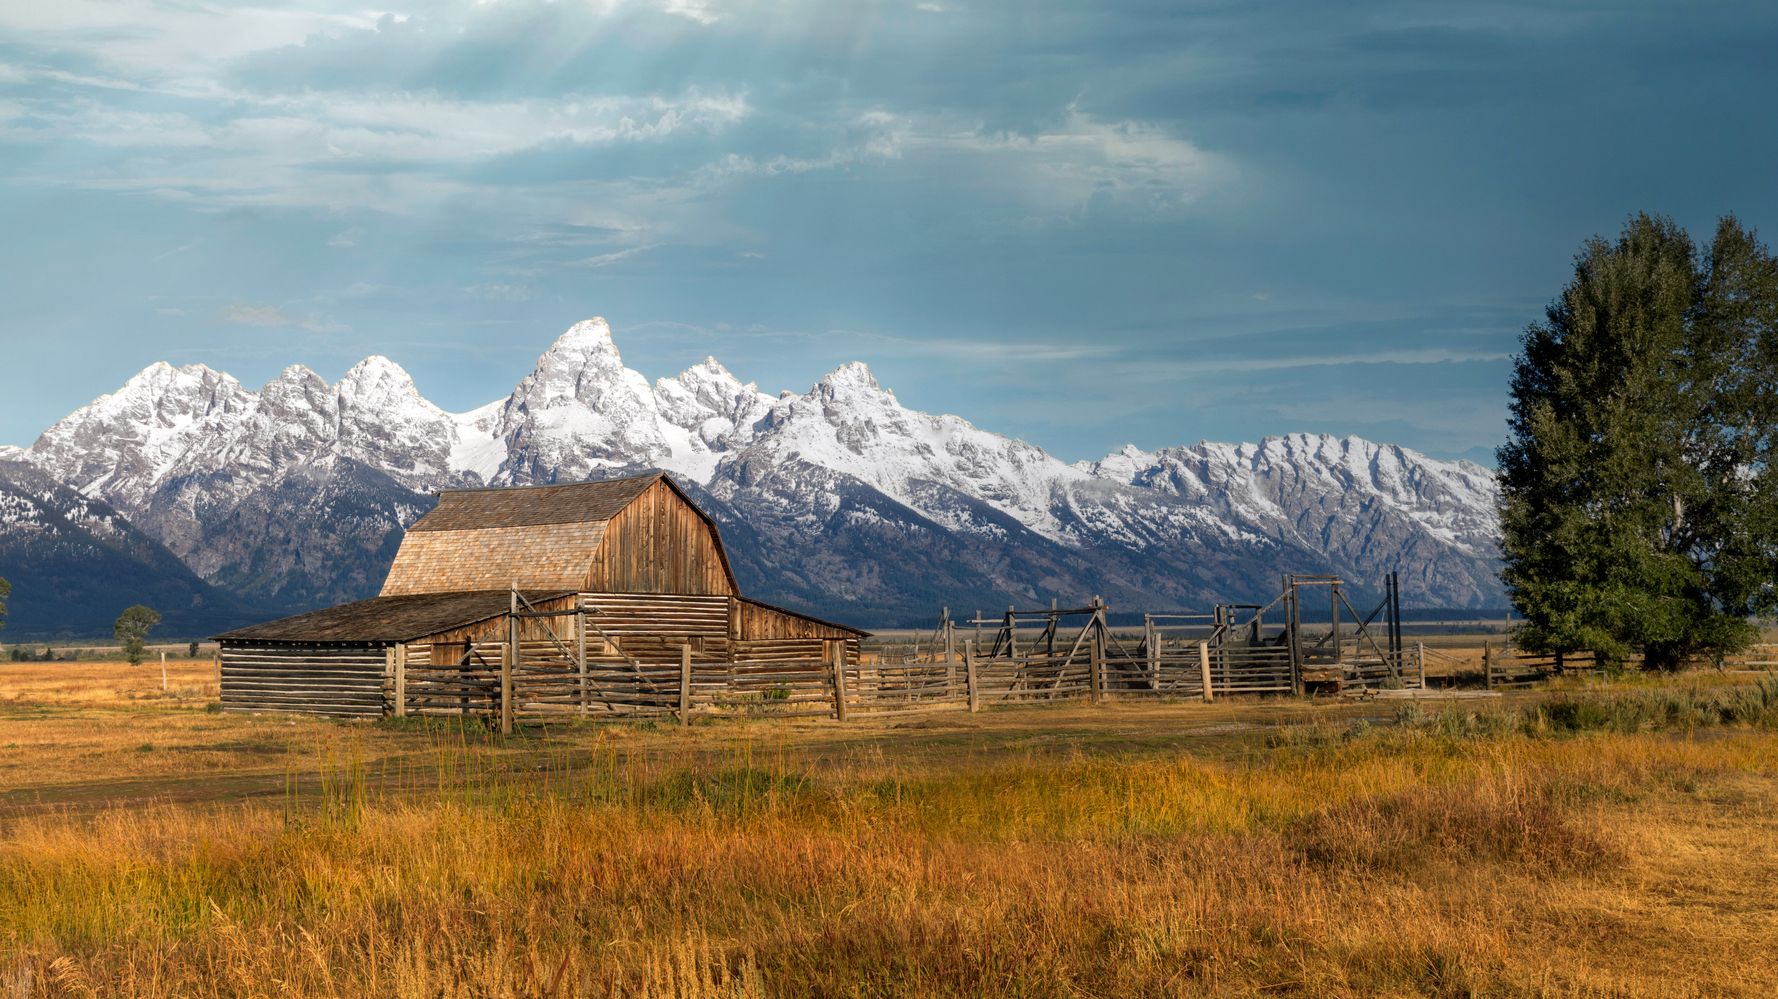 Wealth Income Gap Widens In U.S. Communities With Jackson Hole At The Top